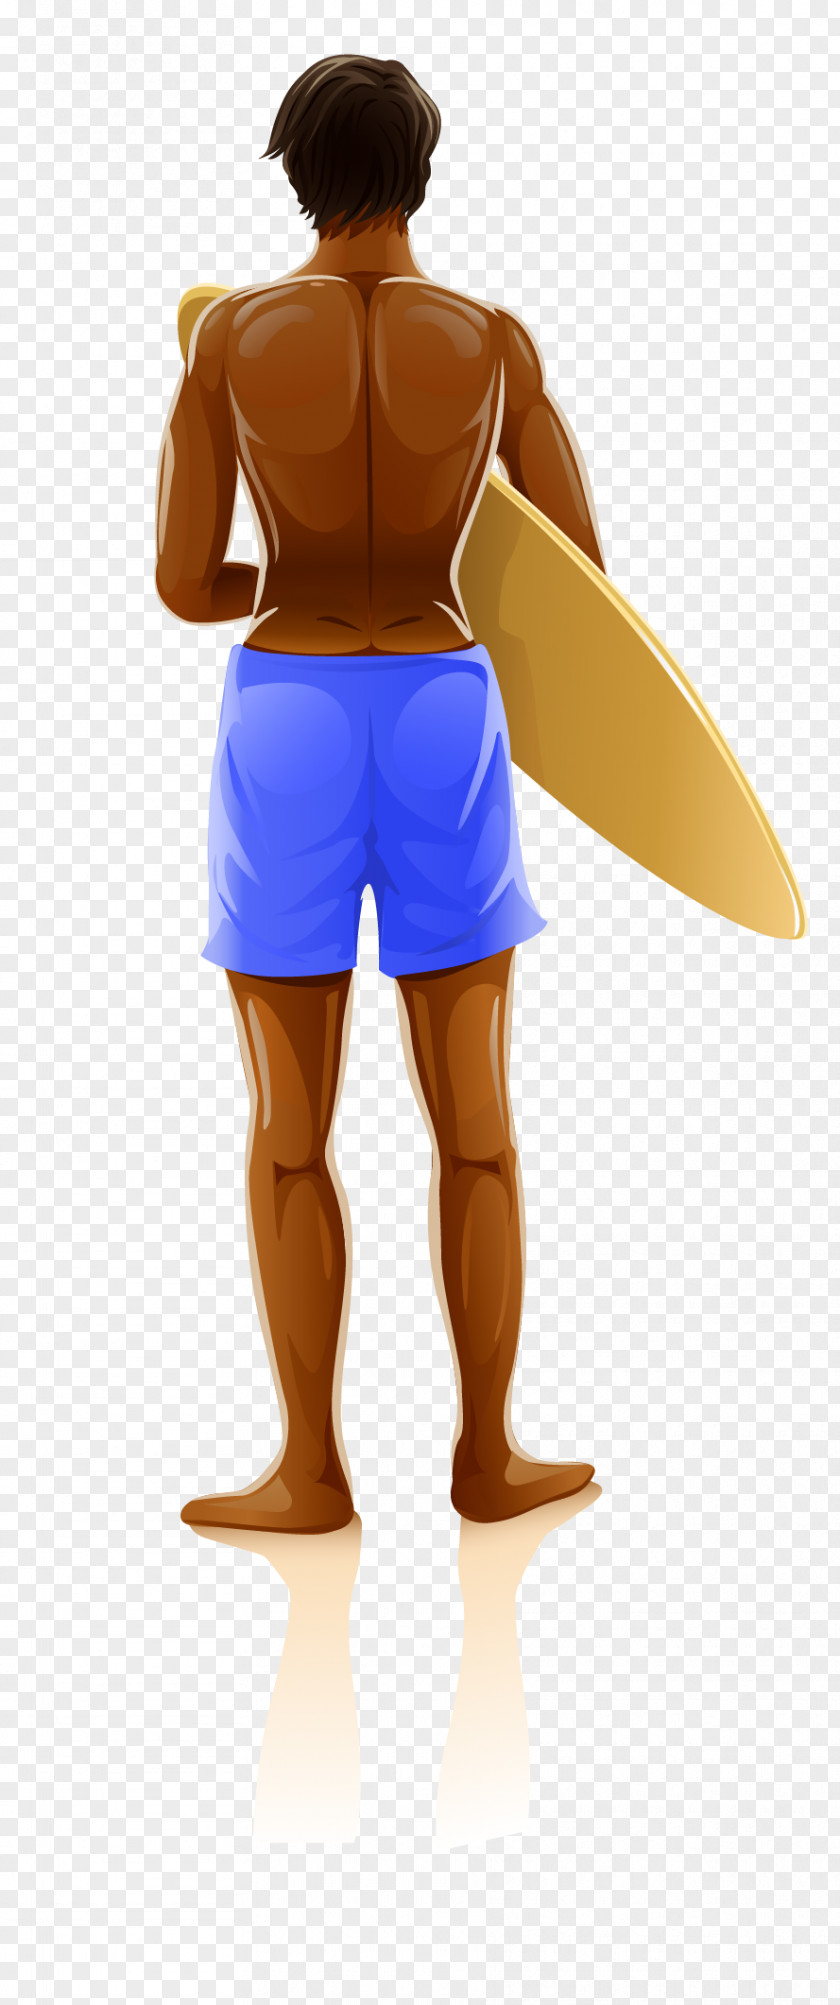 Surfing People Beach PNG